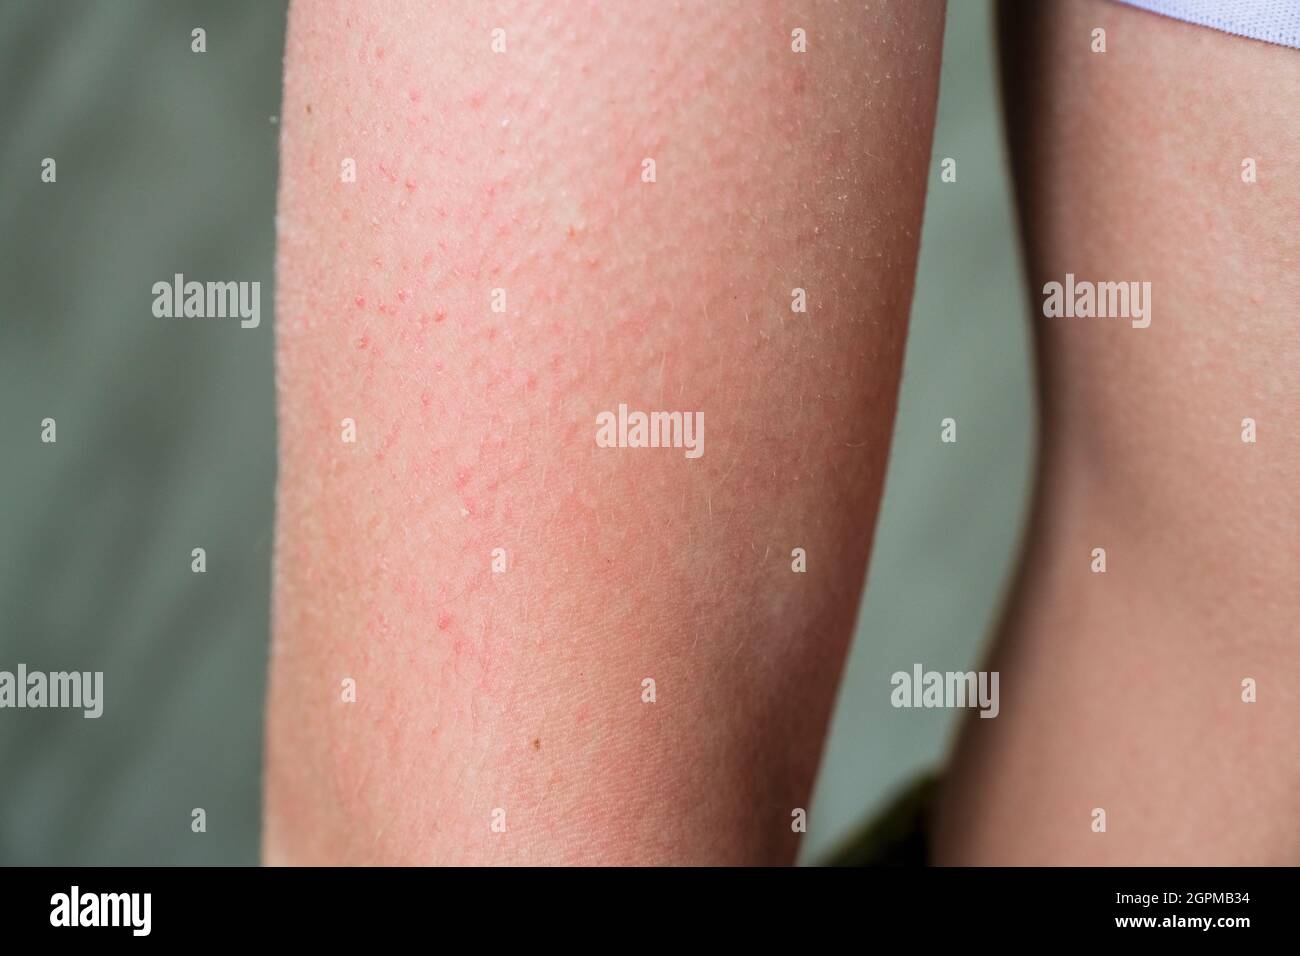 follicular hyperkeratosis is located on the person's arm. Stock Photo